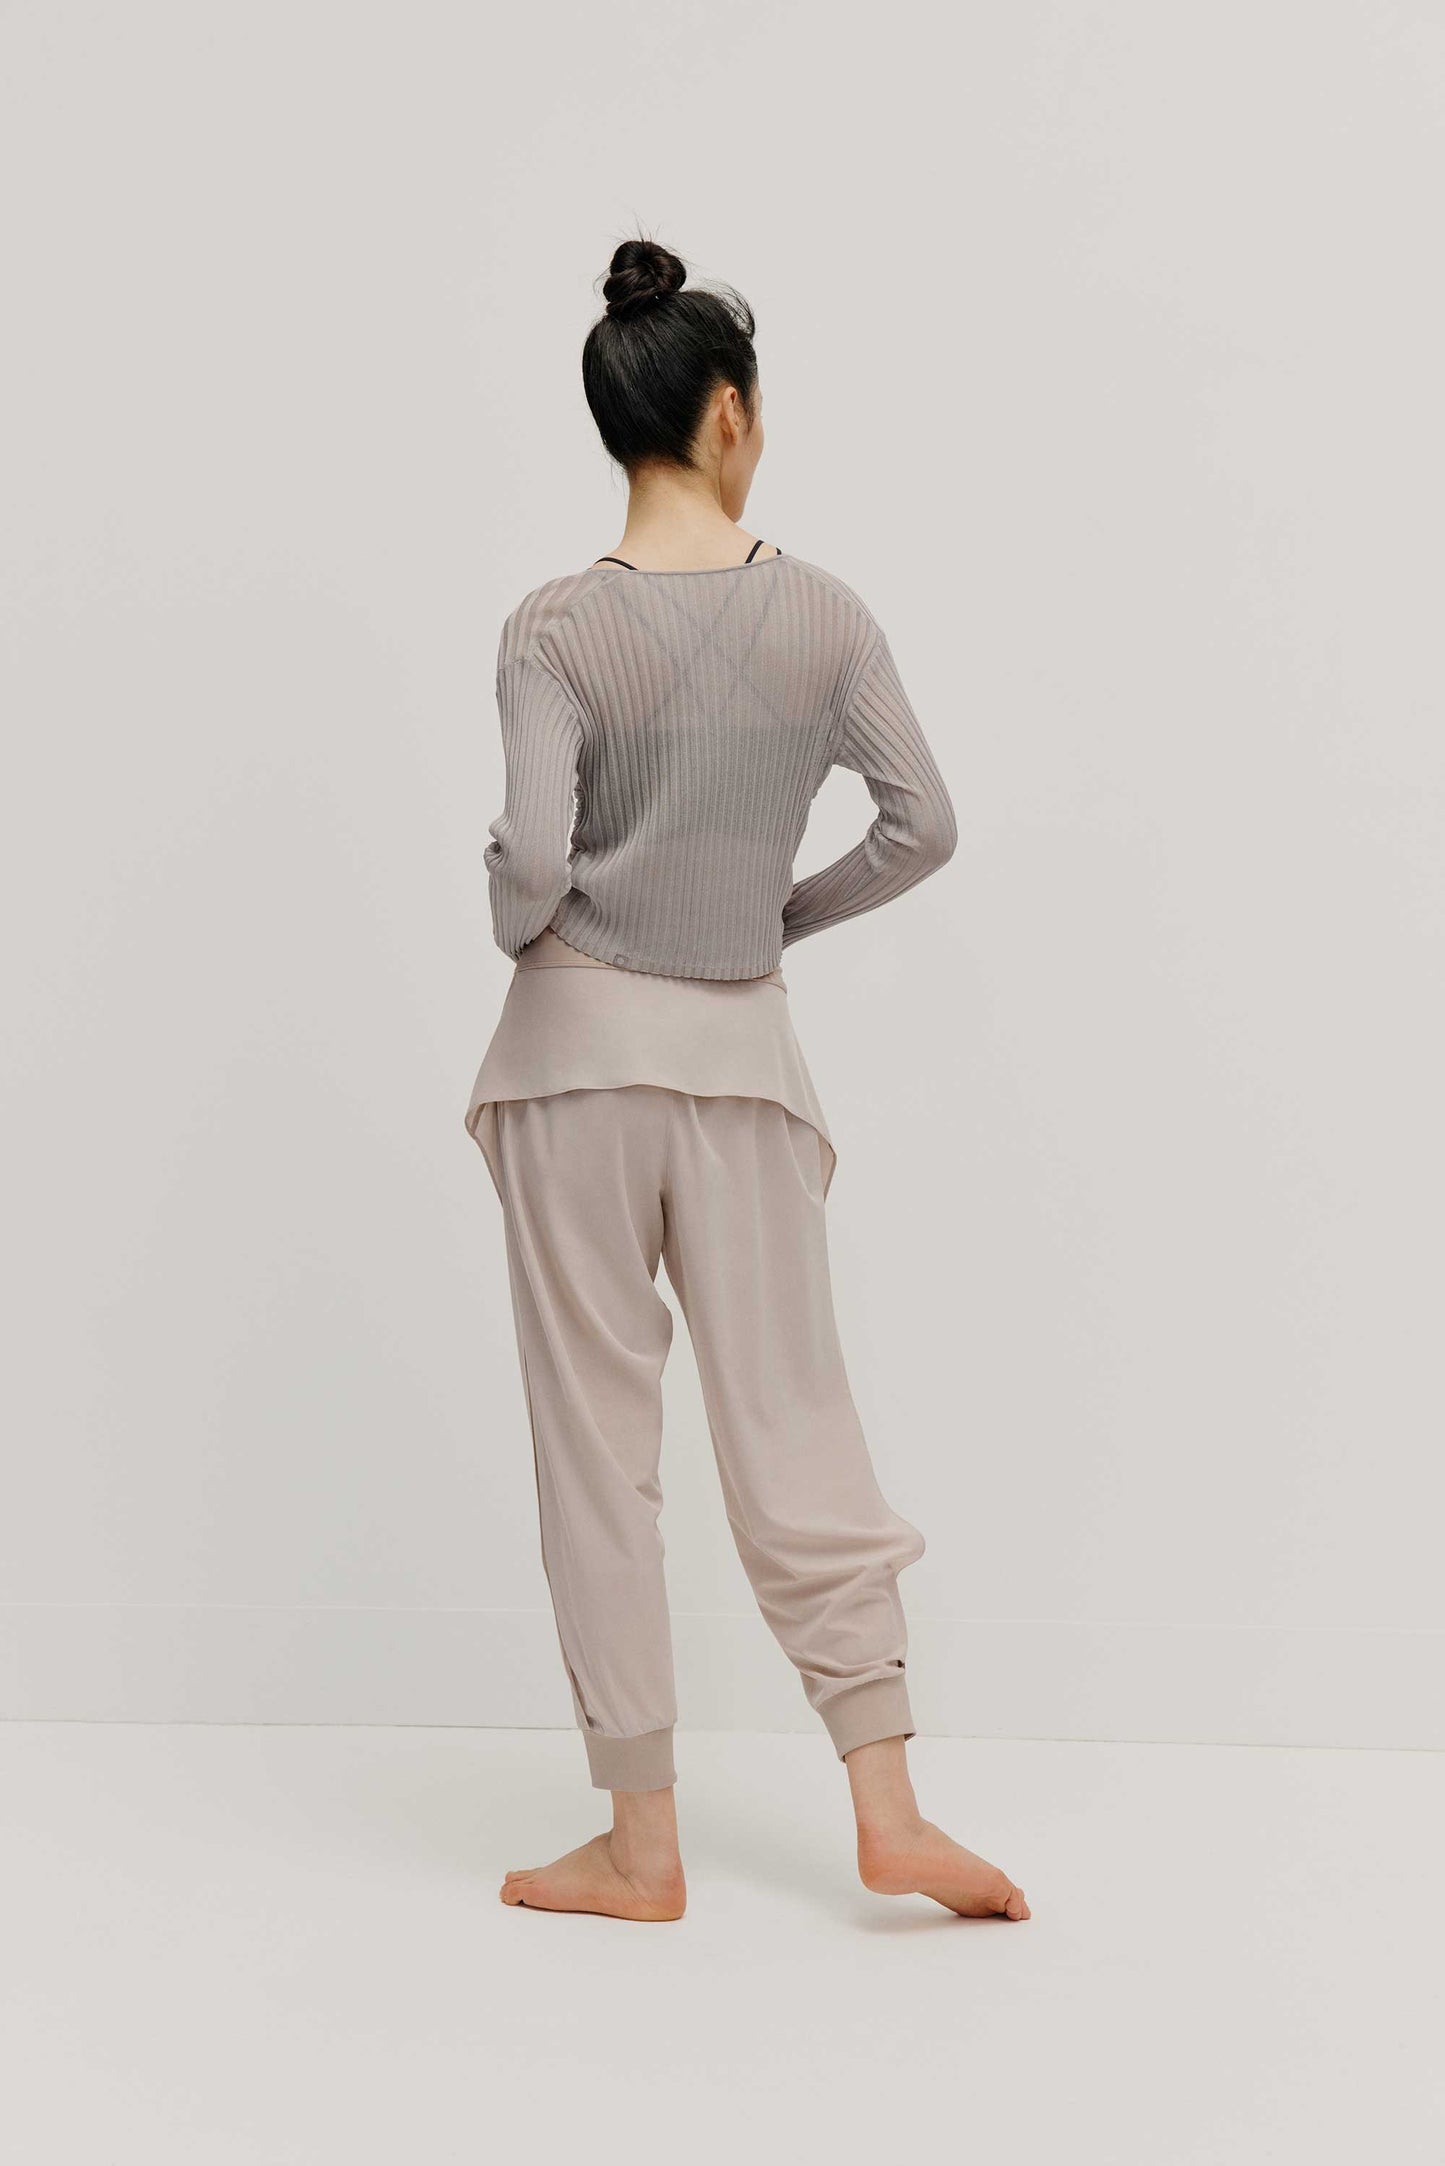 a full body back view of a women wearing a neutral color woven jogger with side slits and a navy bra covered by a mauve color see thru knit top.